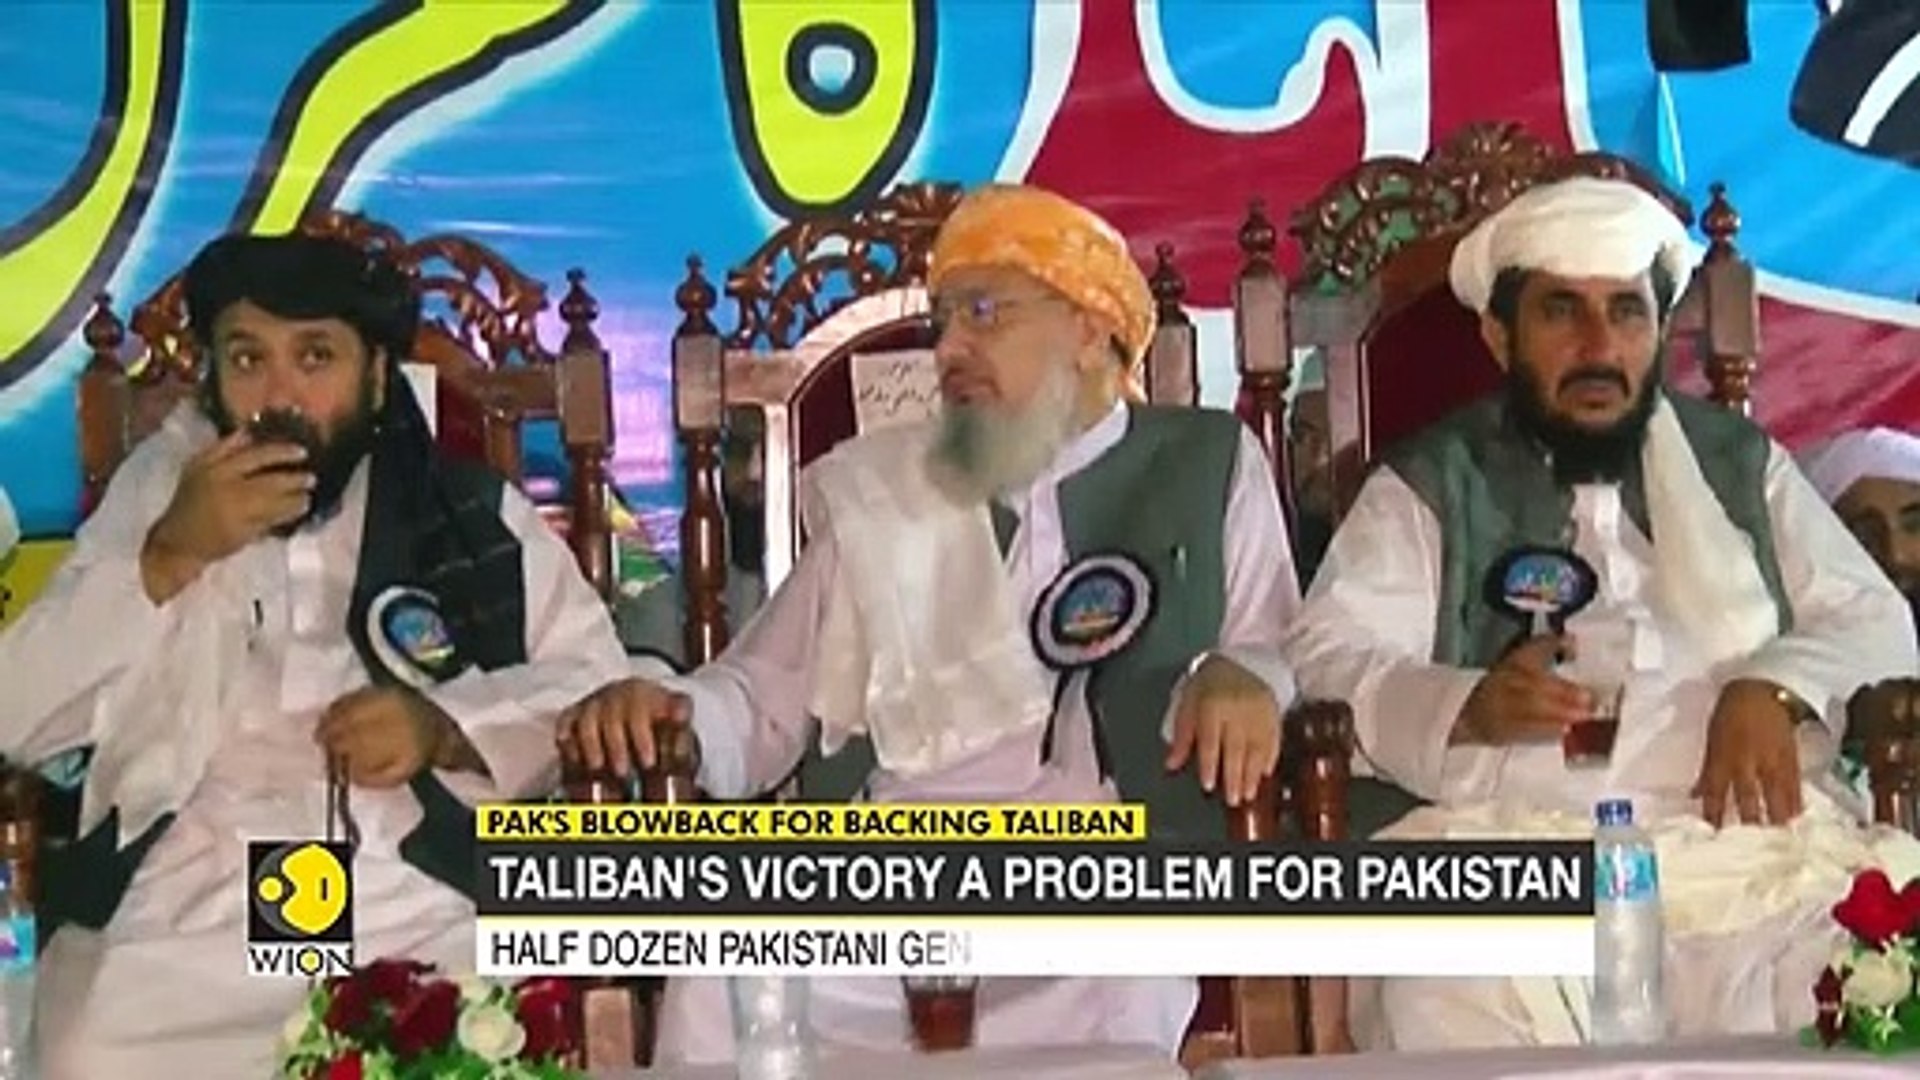 Taliban's victory a problem for Pakistan _ WION English News _ Latest News